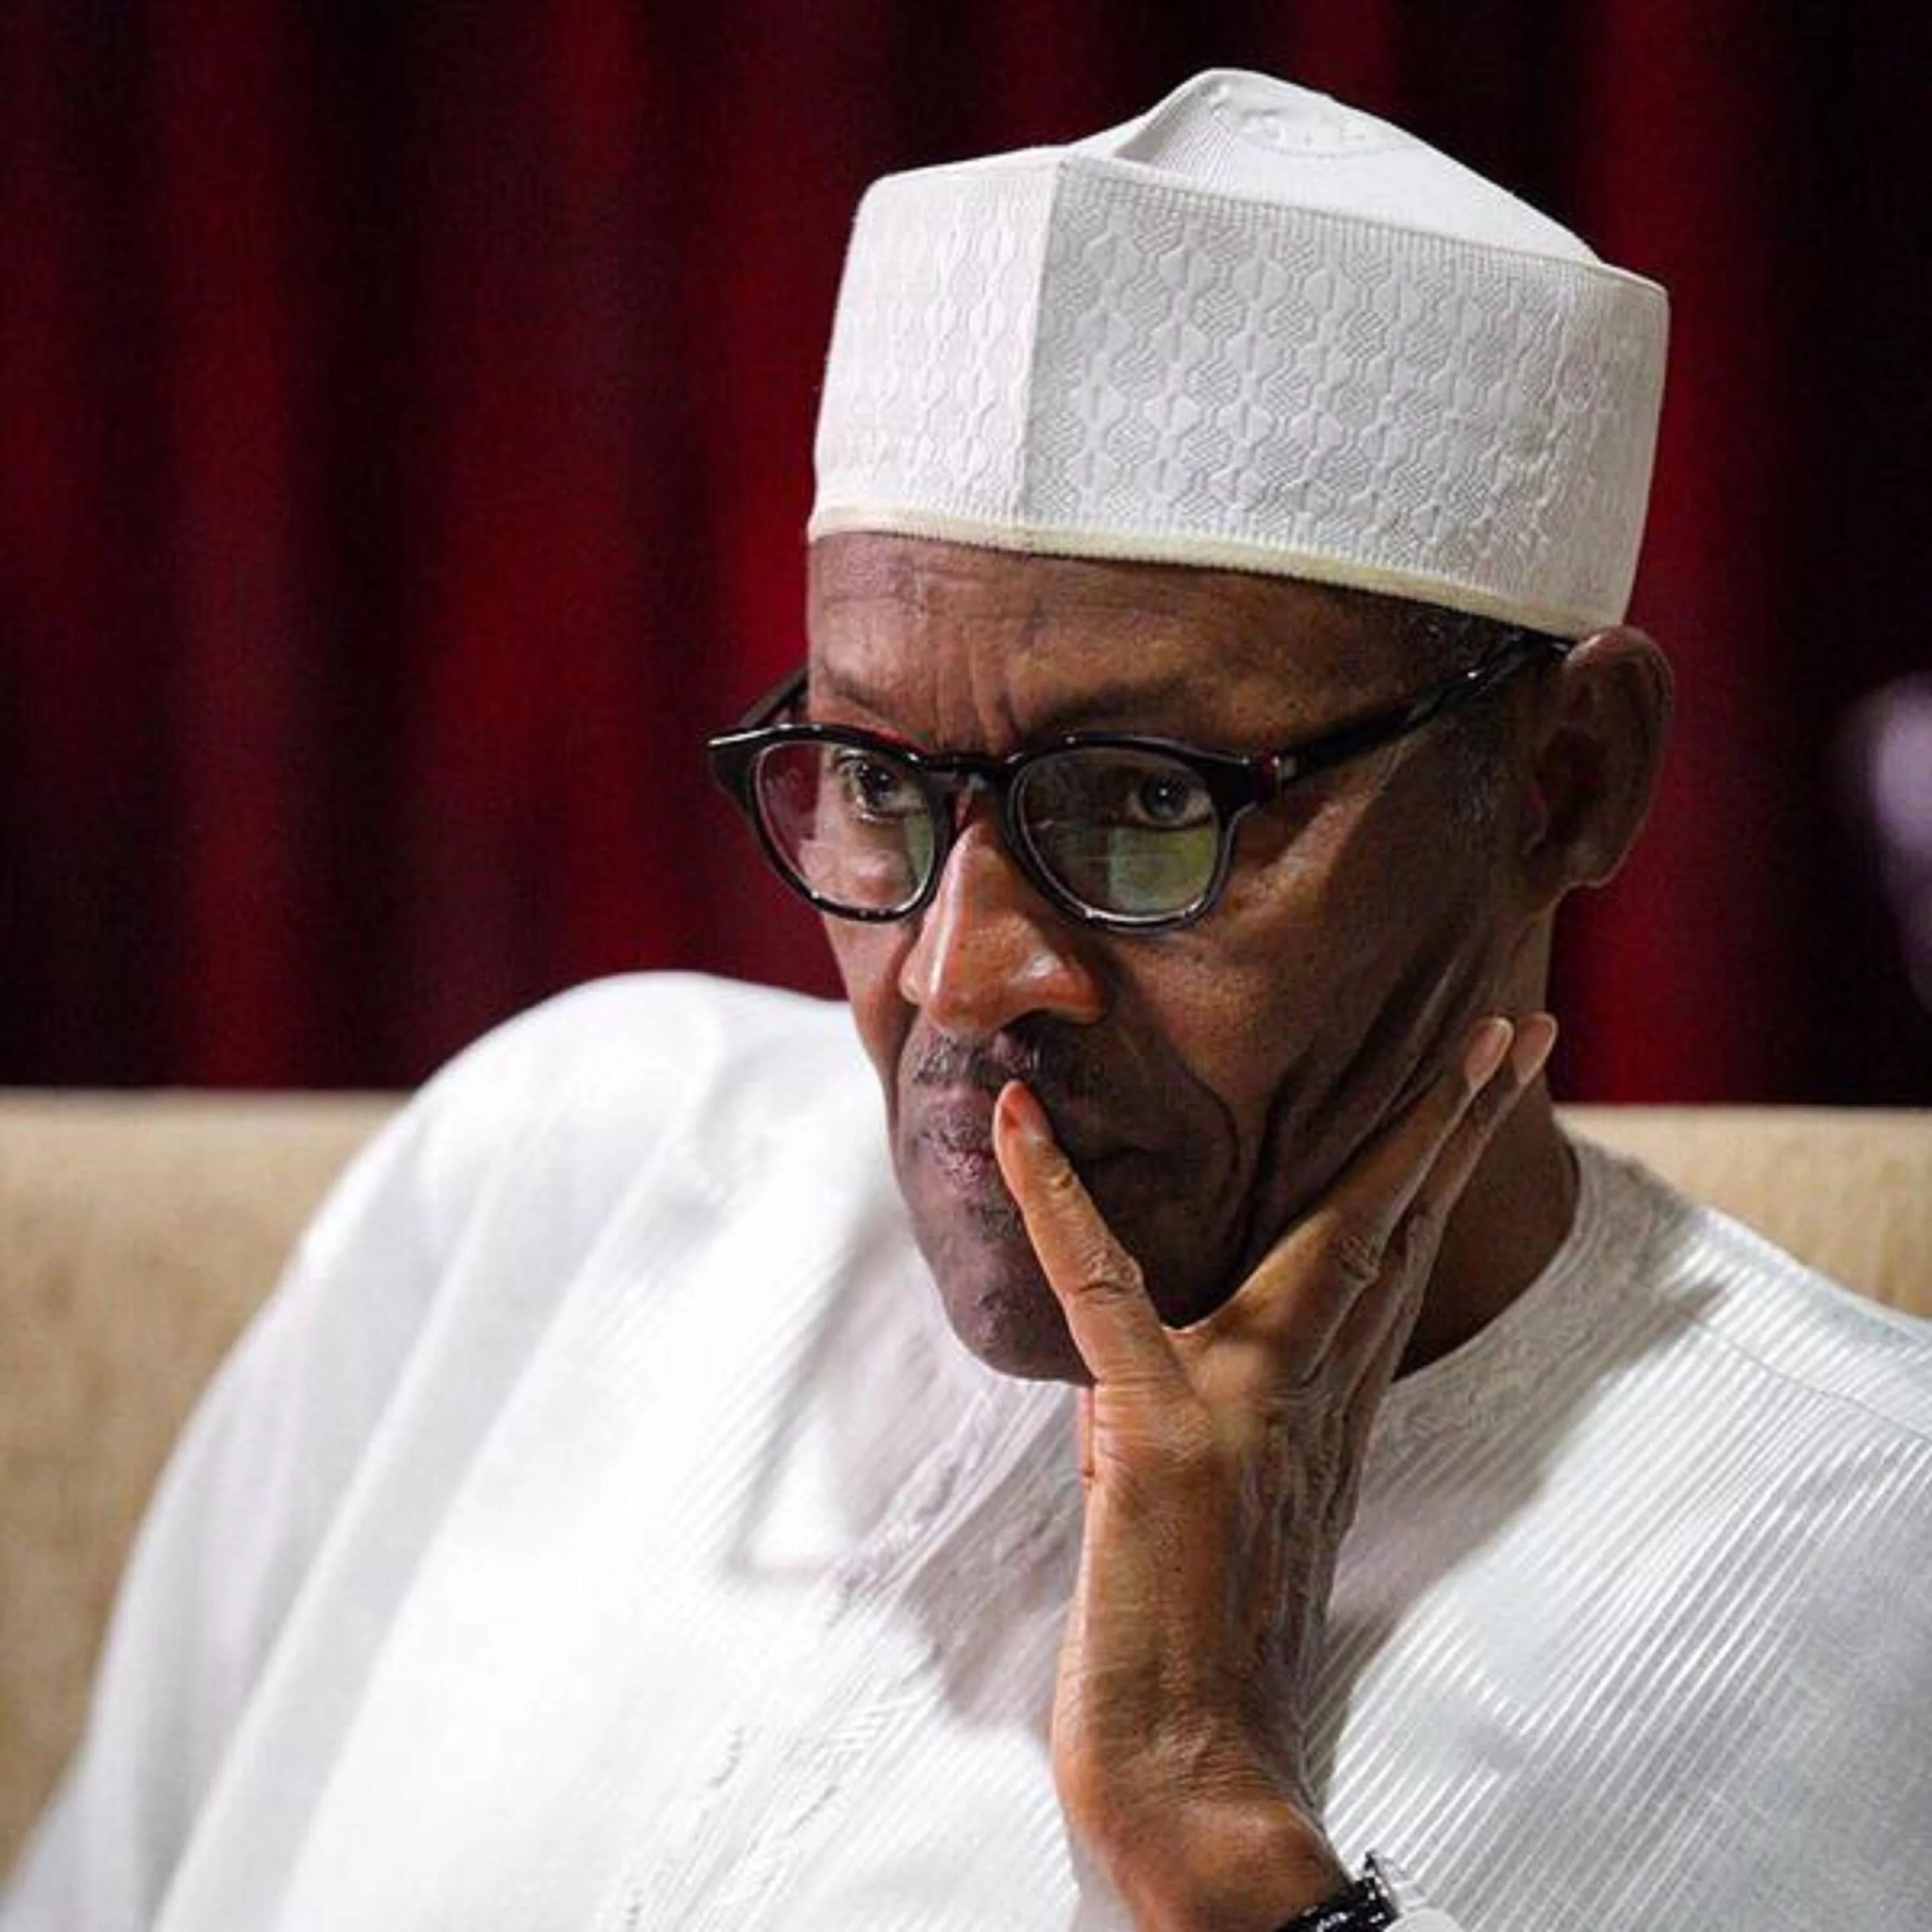 I will not spare APC members, associates found guilty of corruption: Buhari